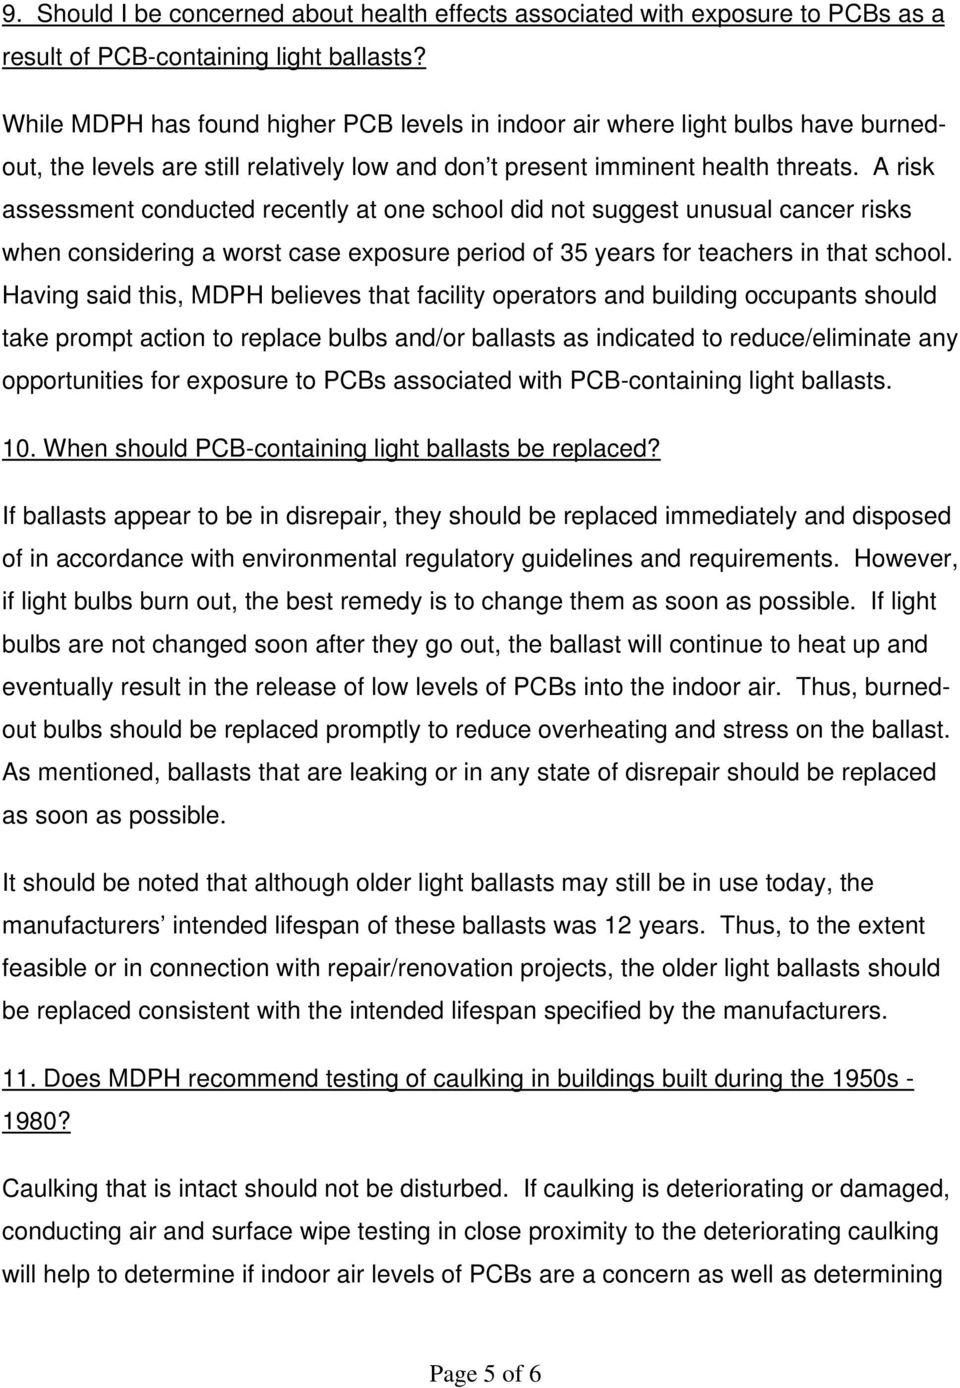 A risk assessment conducted recently at one school did not suggest unusual cancer risks when considering a worst case exposure period of 35 years for teachers in that school.